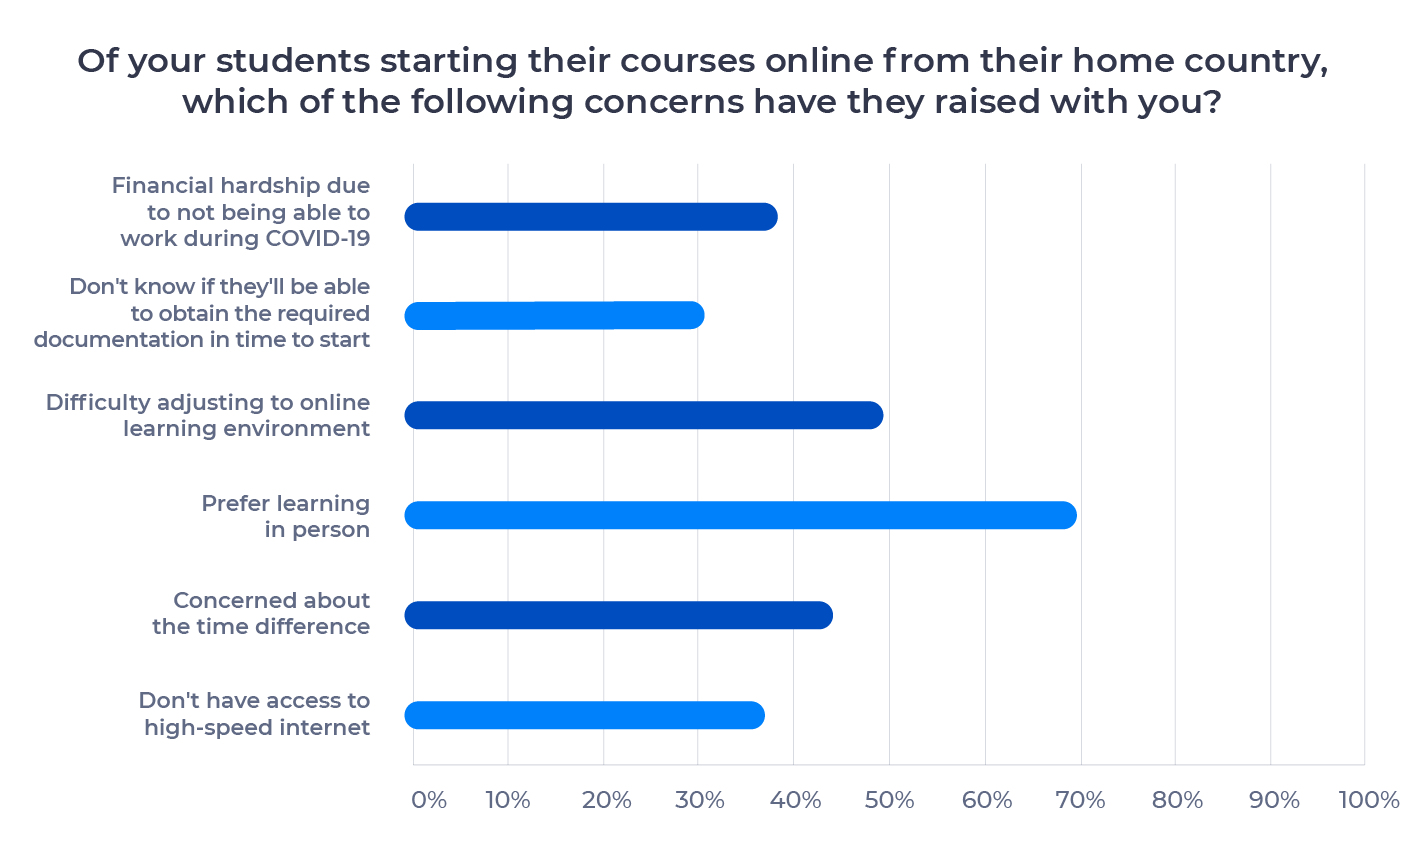 Bar chart showing concerns students have raised about starting courses online from their home country. Examined in detail below.